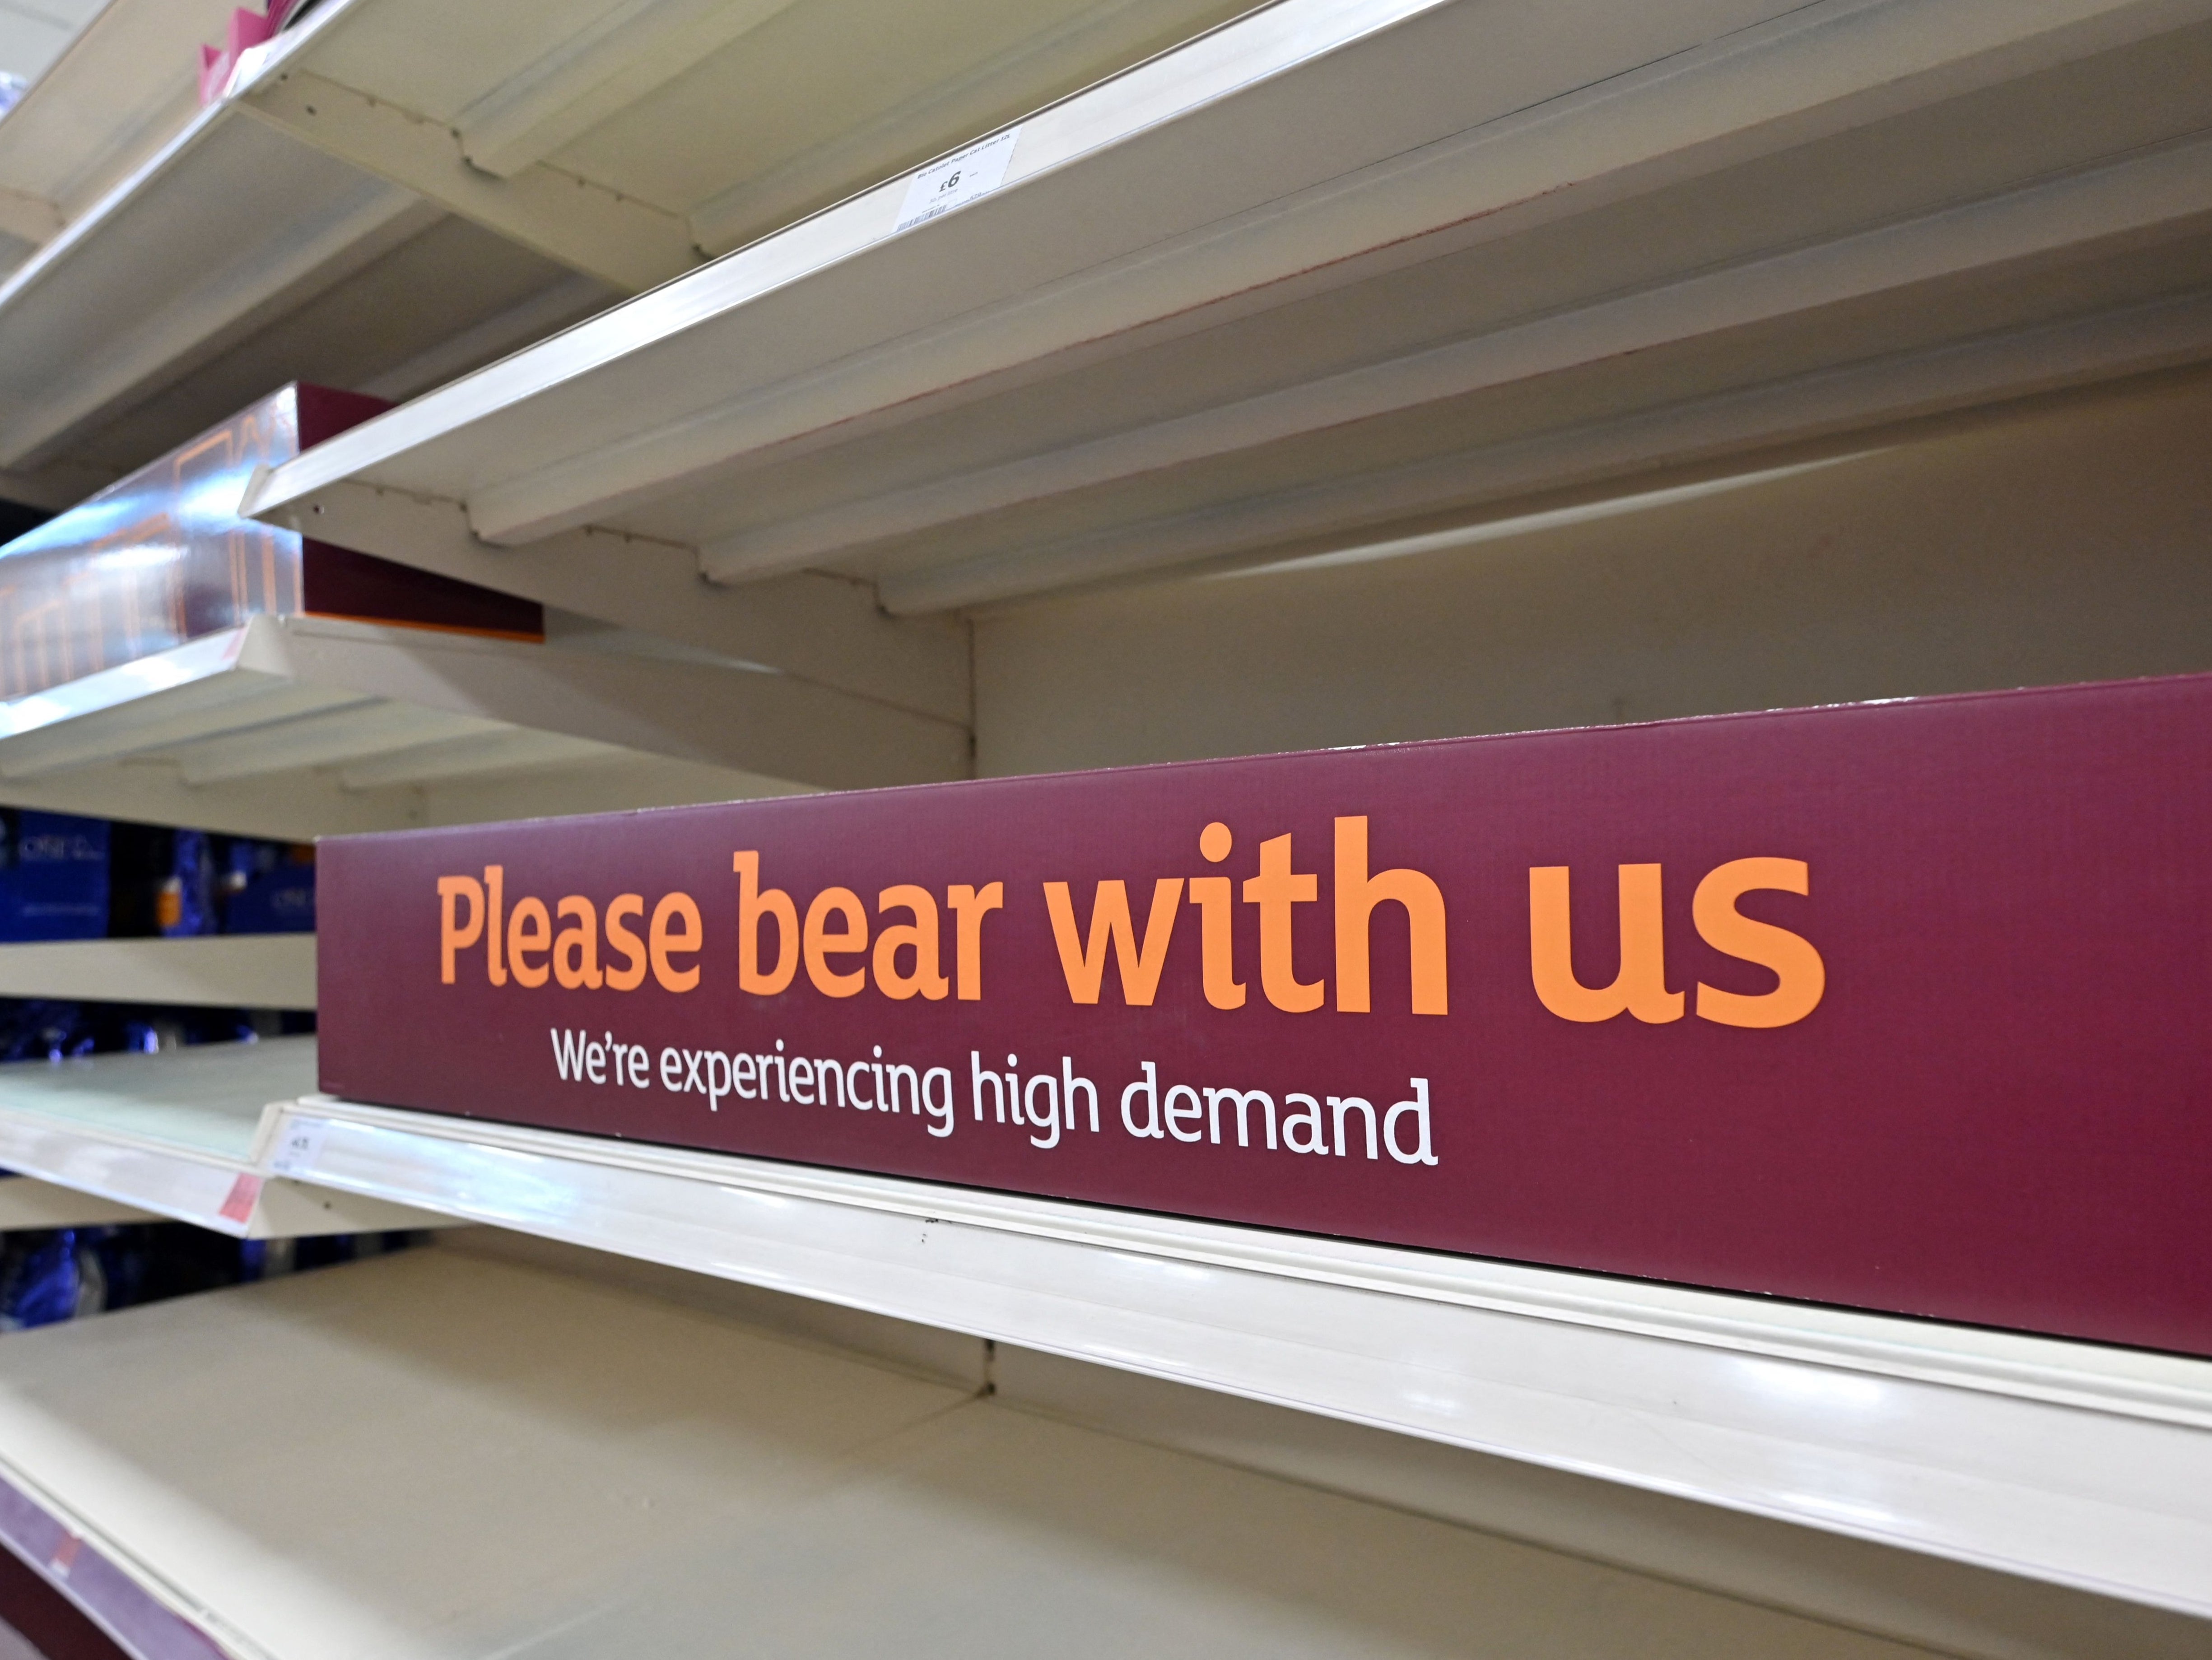 A sign requesting shoppers' patience about products temporarily out of stock is displayed on empty shelves